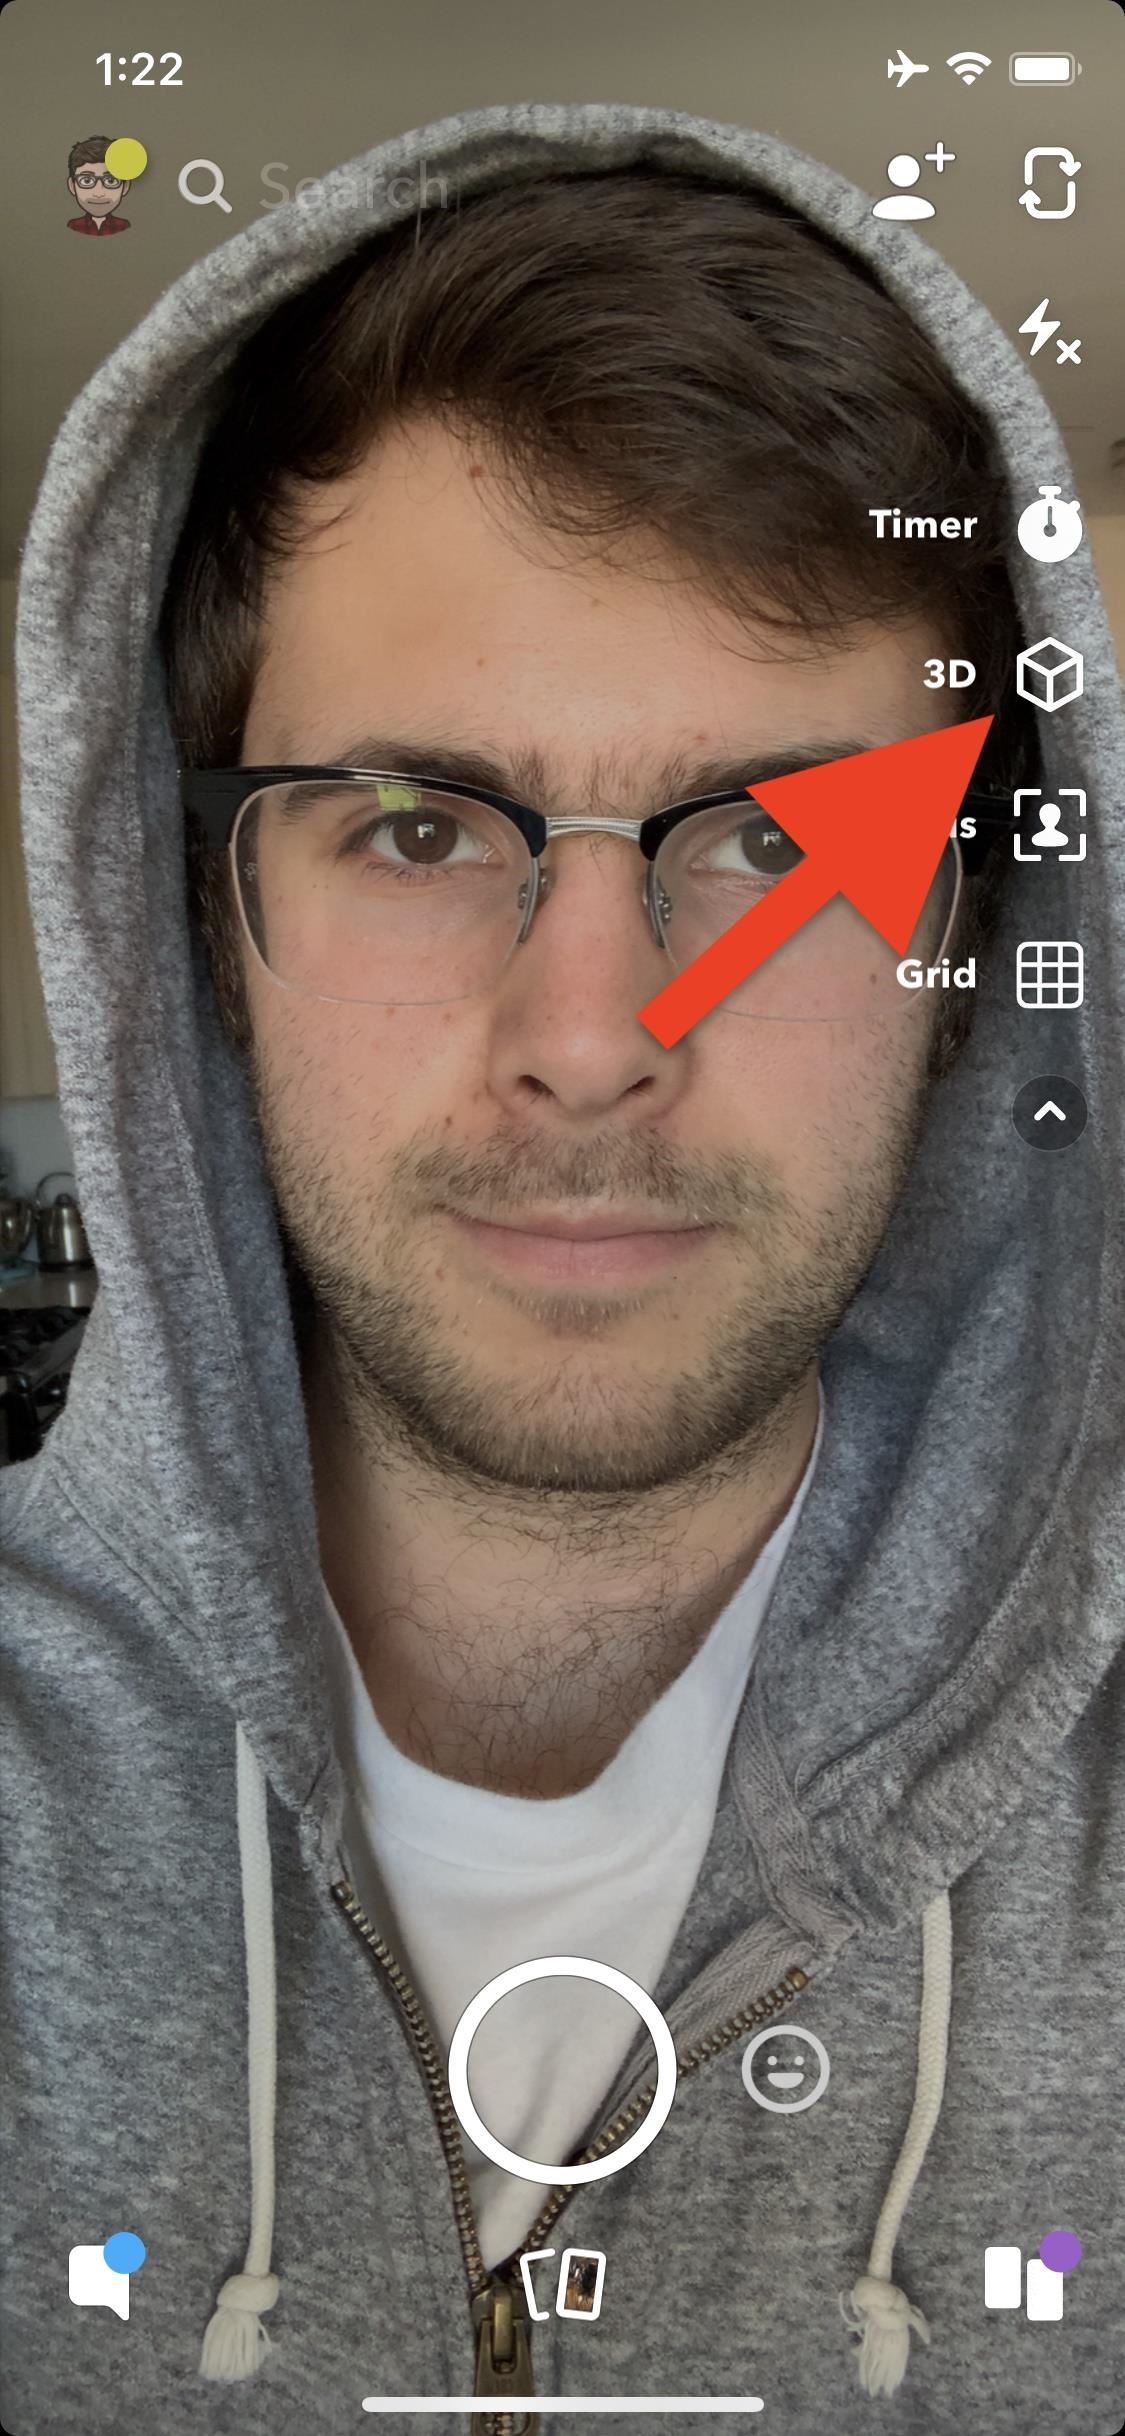 Find 3D Snapchat Filters for New Effects with Your iPhone's Face ID Camera